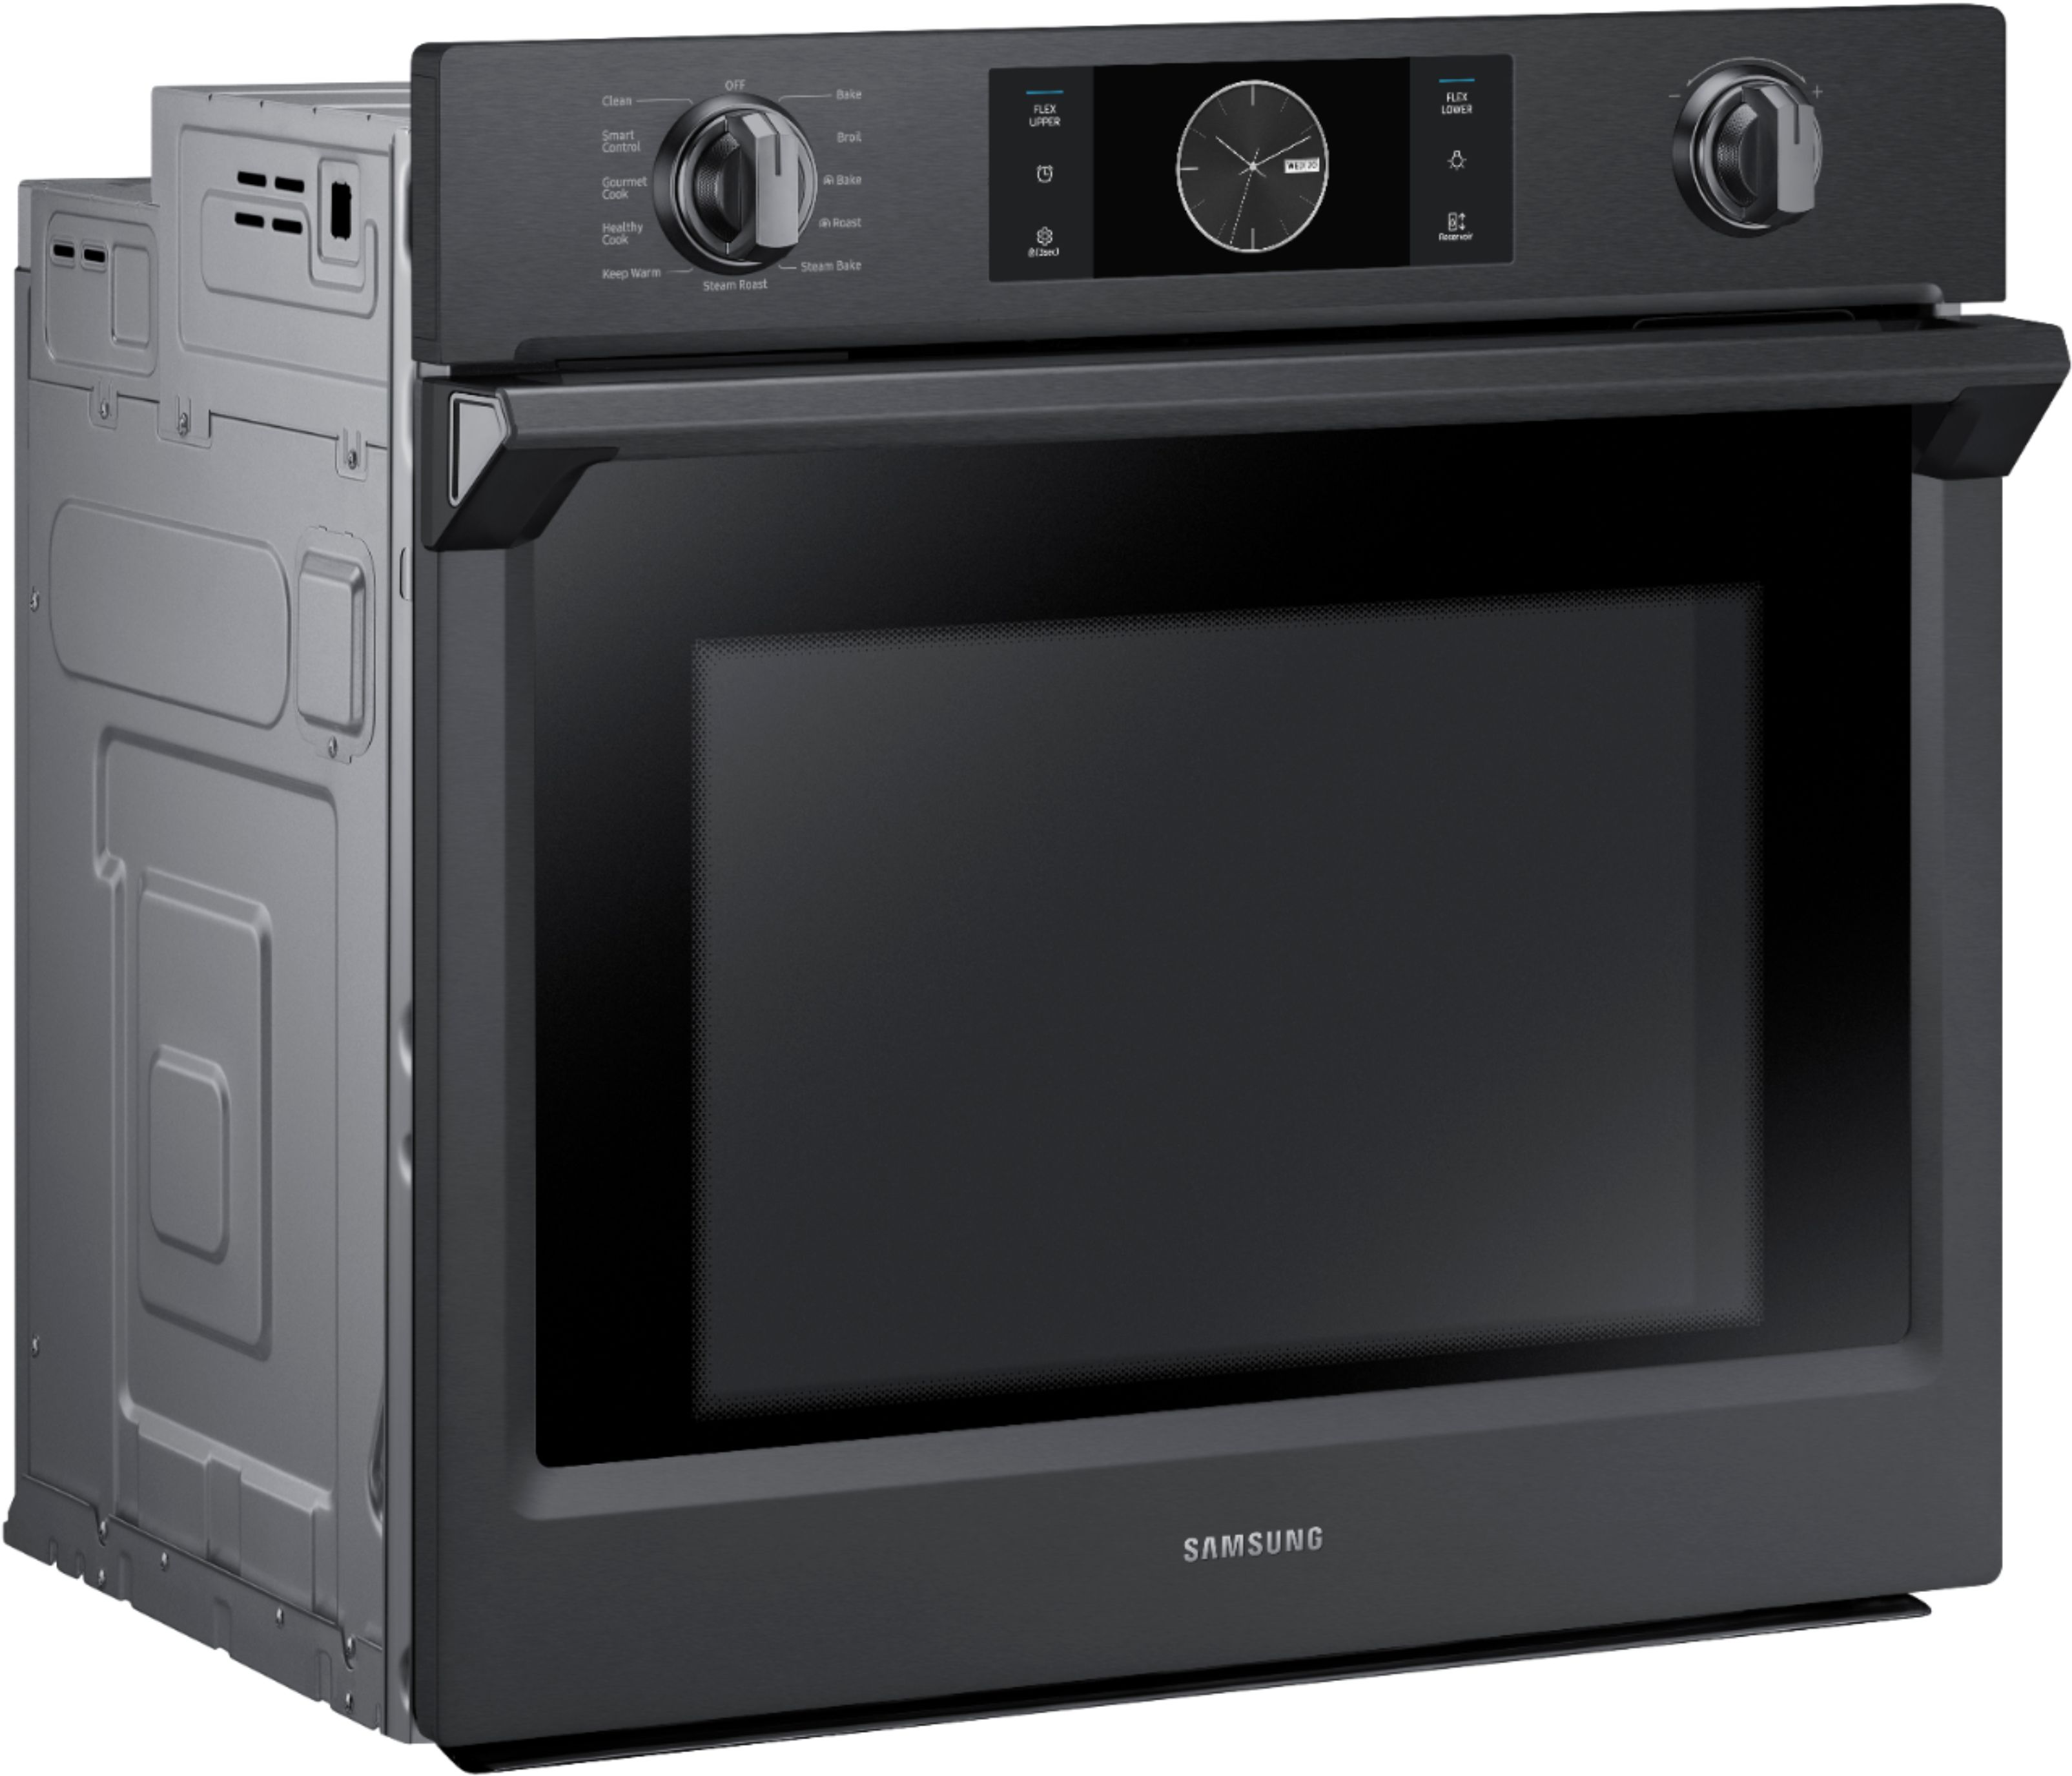 Angle View: Samsung - 30" Single Wall Oven with Flex Duo, Steam Cook and WiFi - Black stainless steel